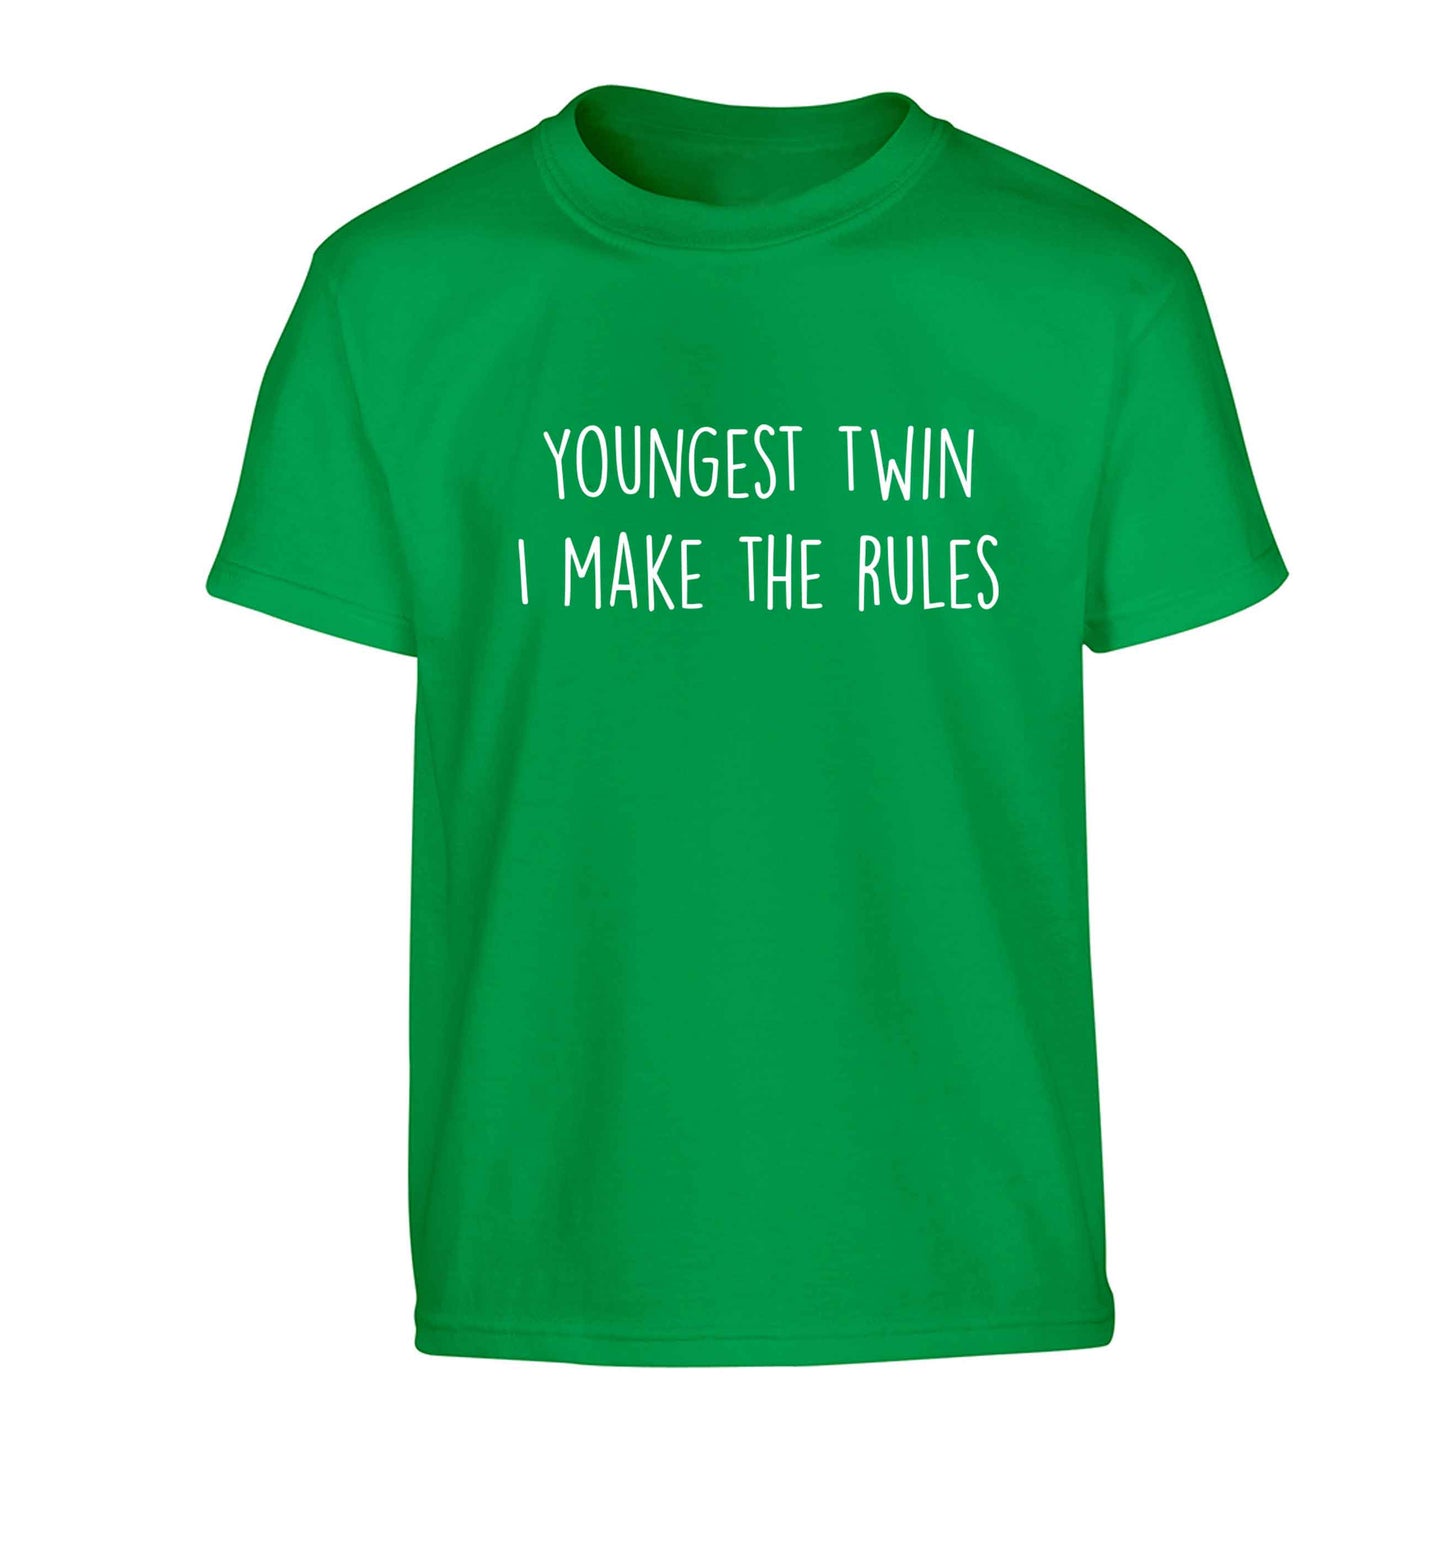 Youngest twin I make the rules Children's green Tshirt 12-13 Years